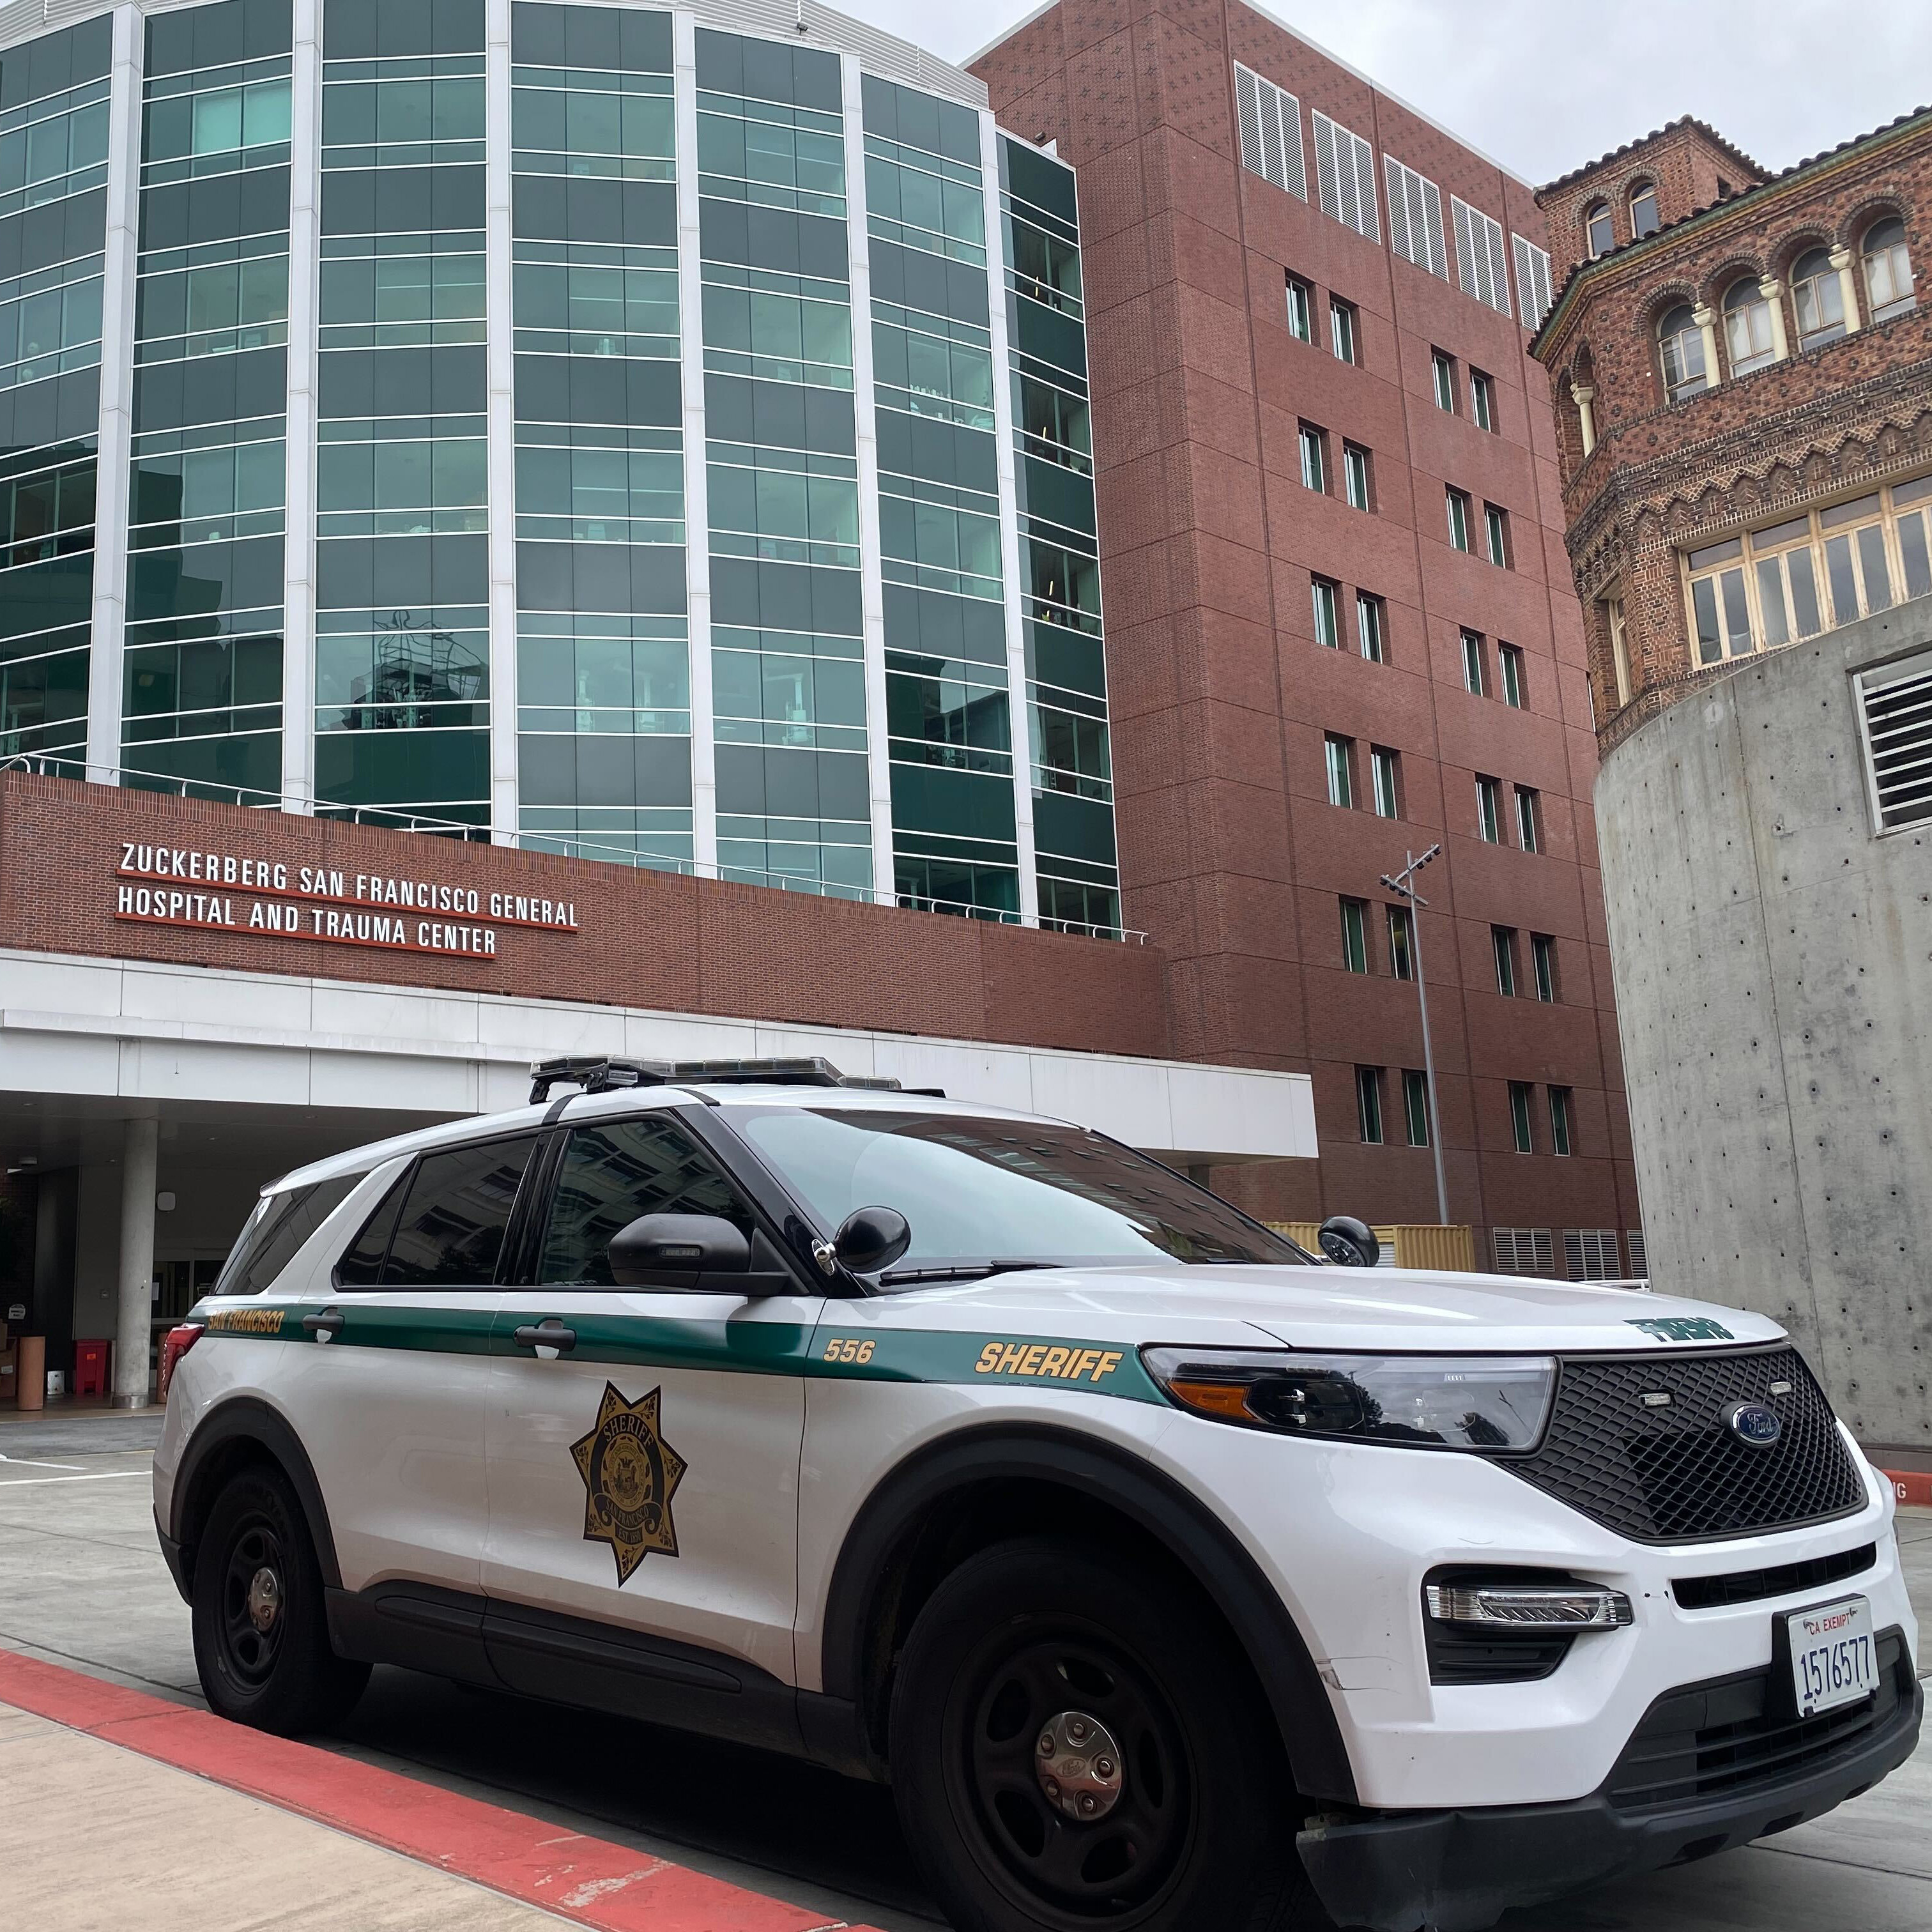 A sheriff's car parked outside the Zuckerberg San Francisco General Hospital.